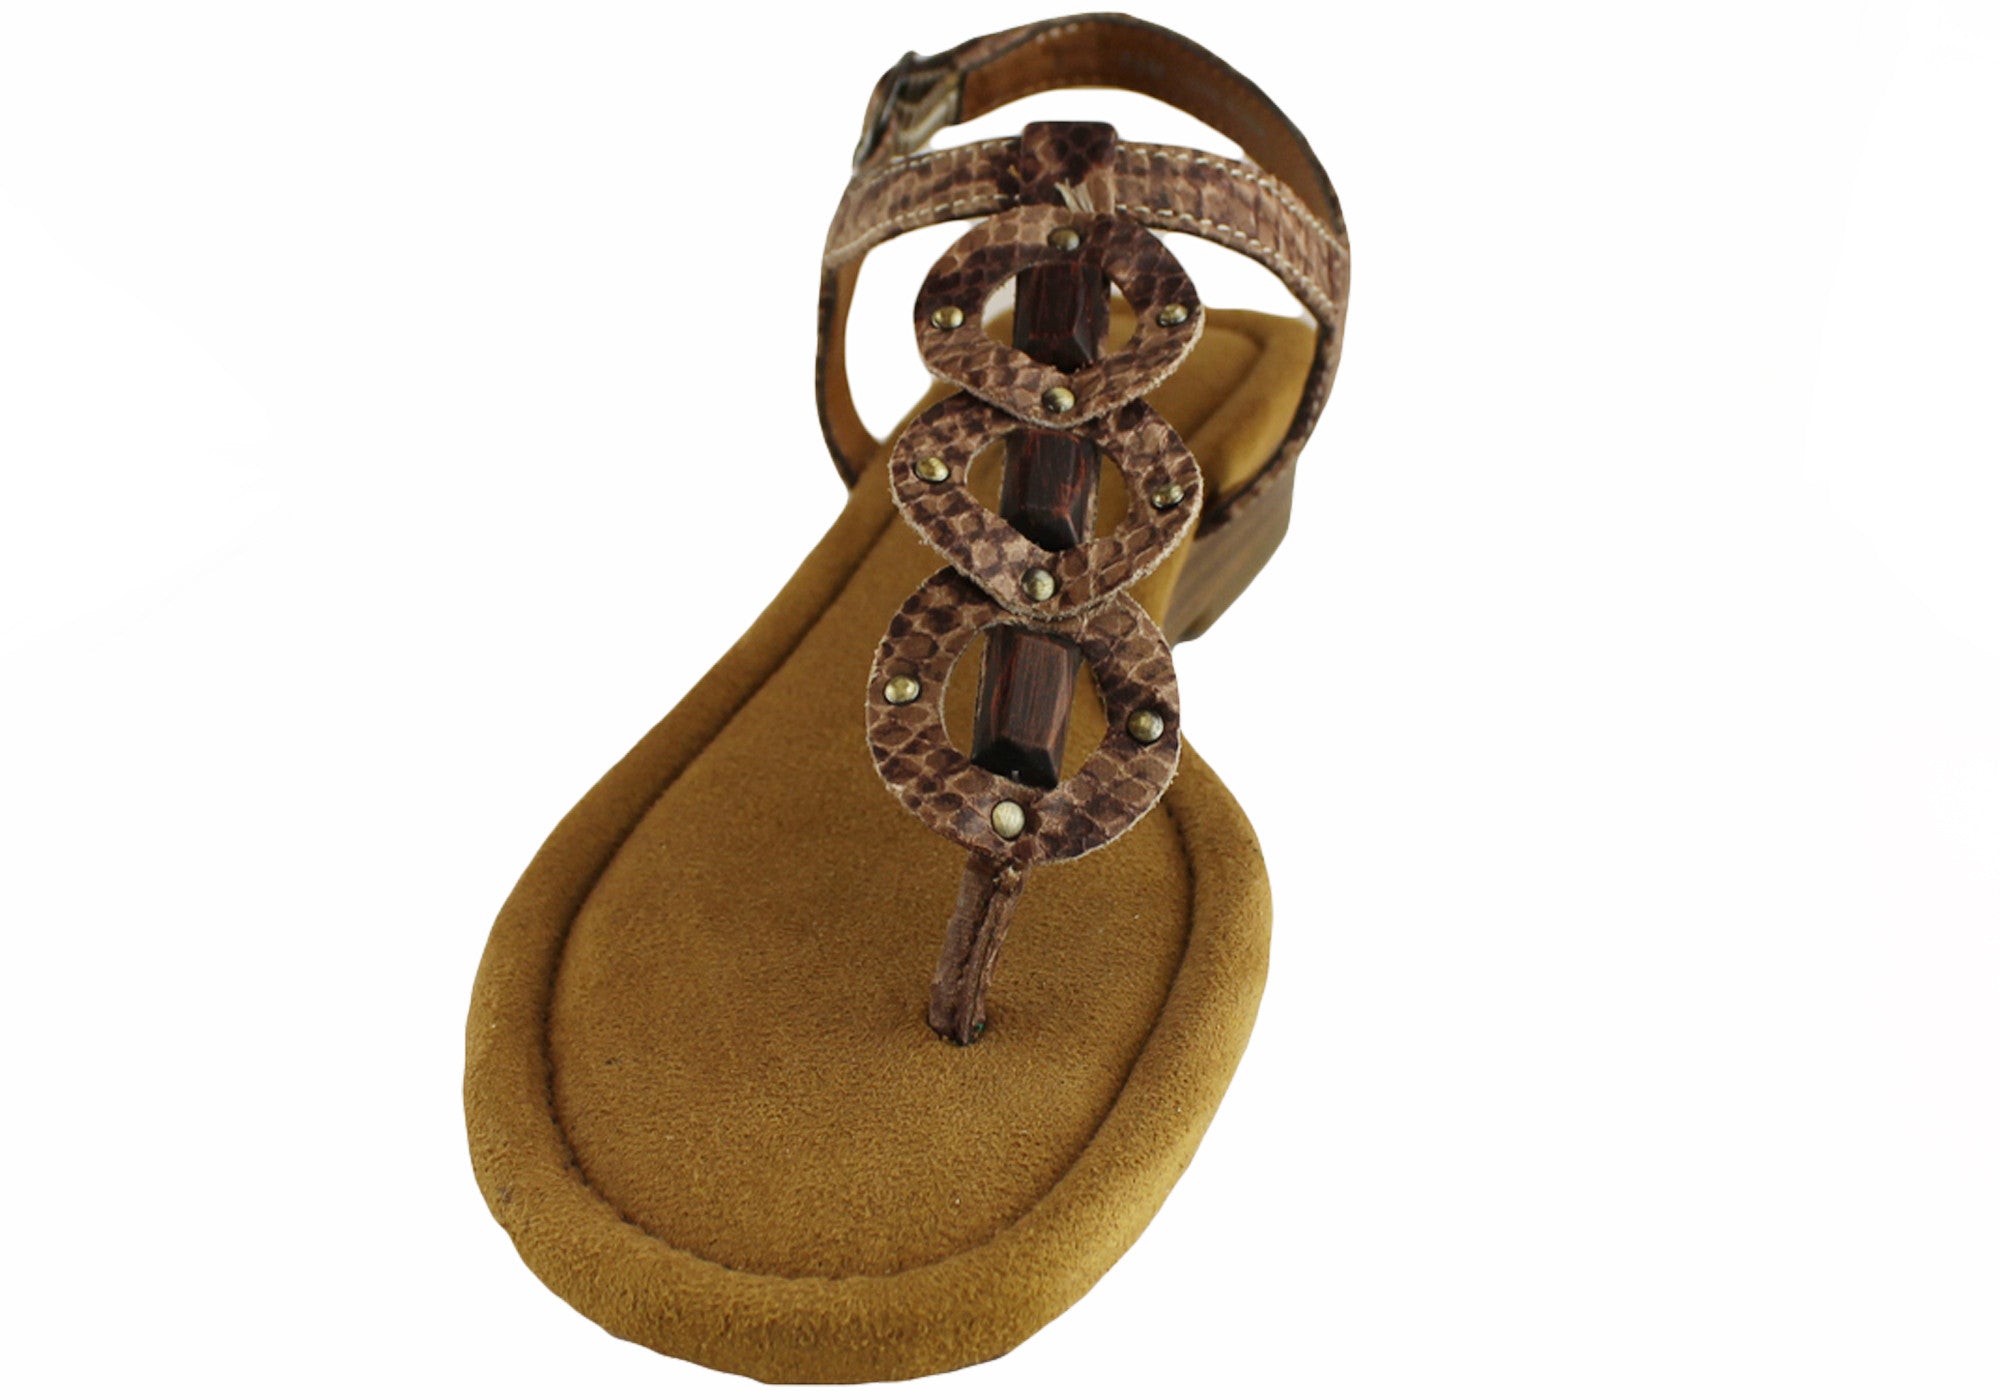 Natural Soul by Naturalizer Rolla Womens Leather Sandals